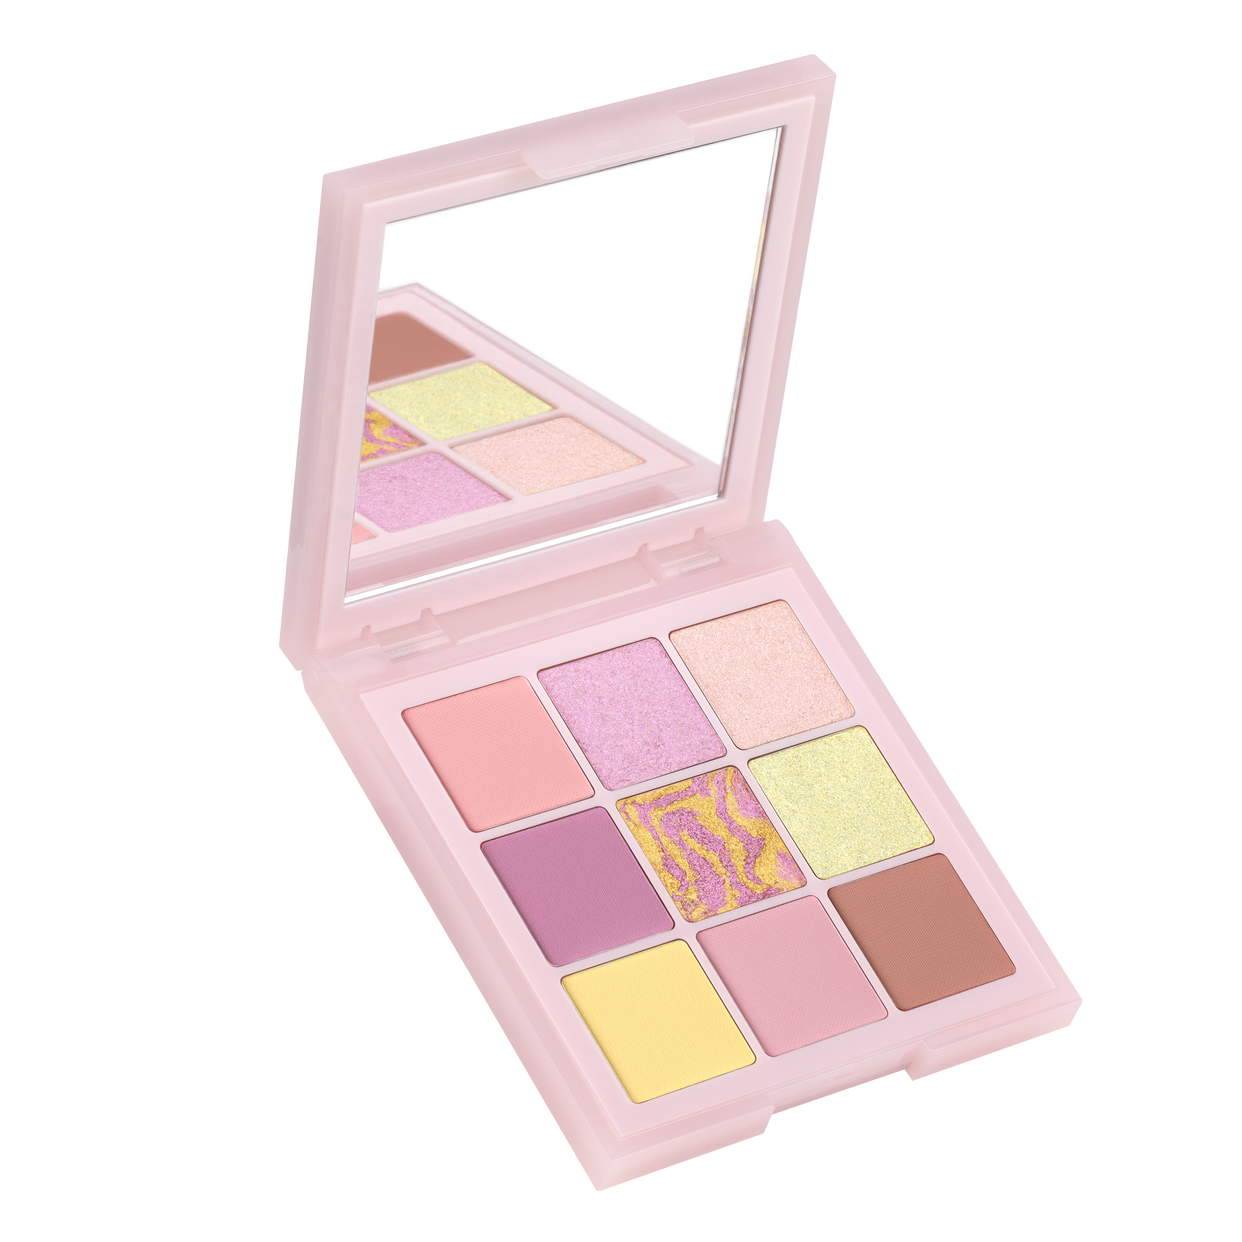 PASTEL Obsessions Eyeshadow Palettes - Rose  Huda Beauty